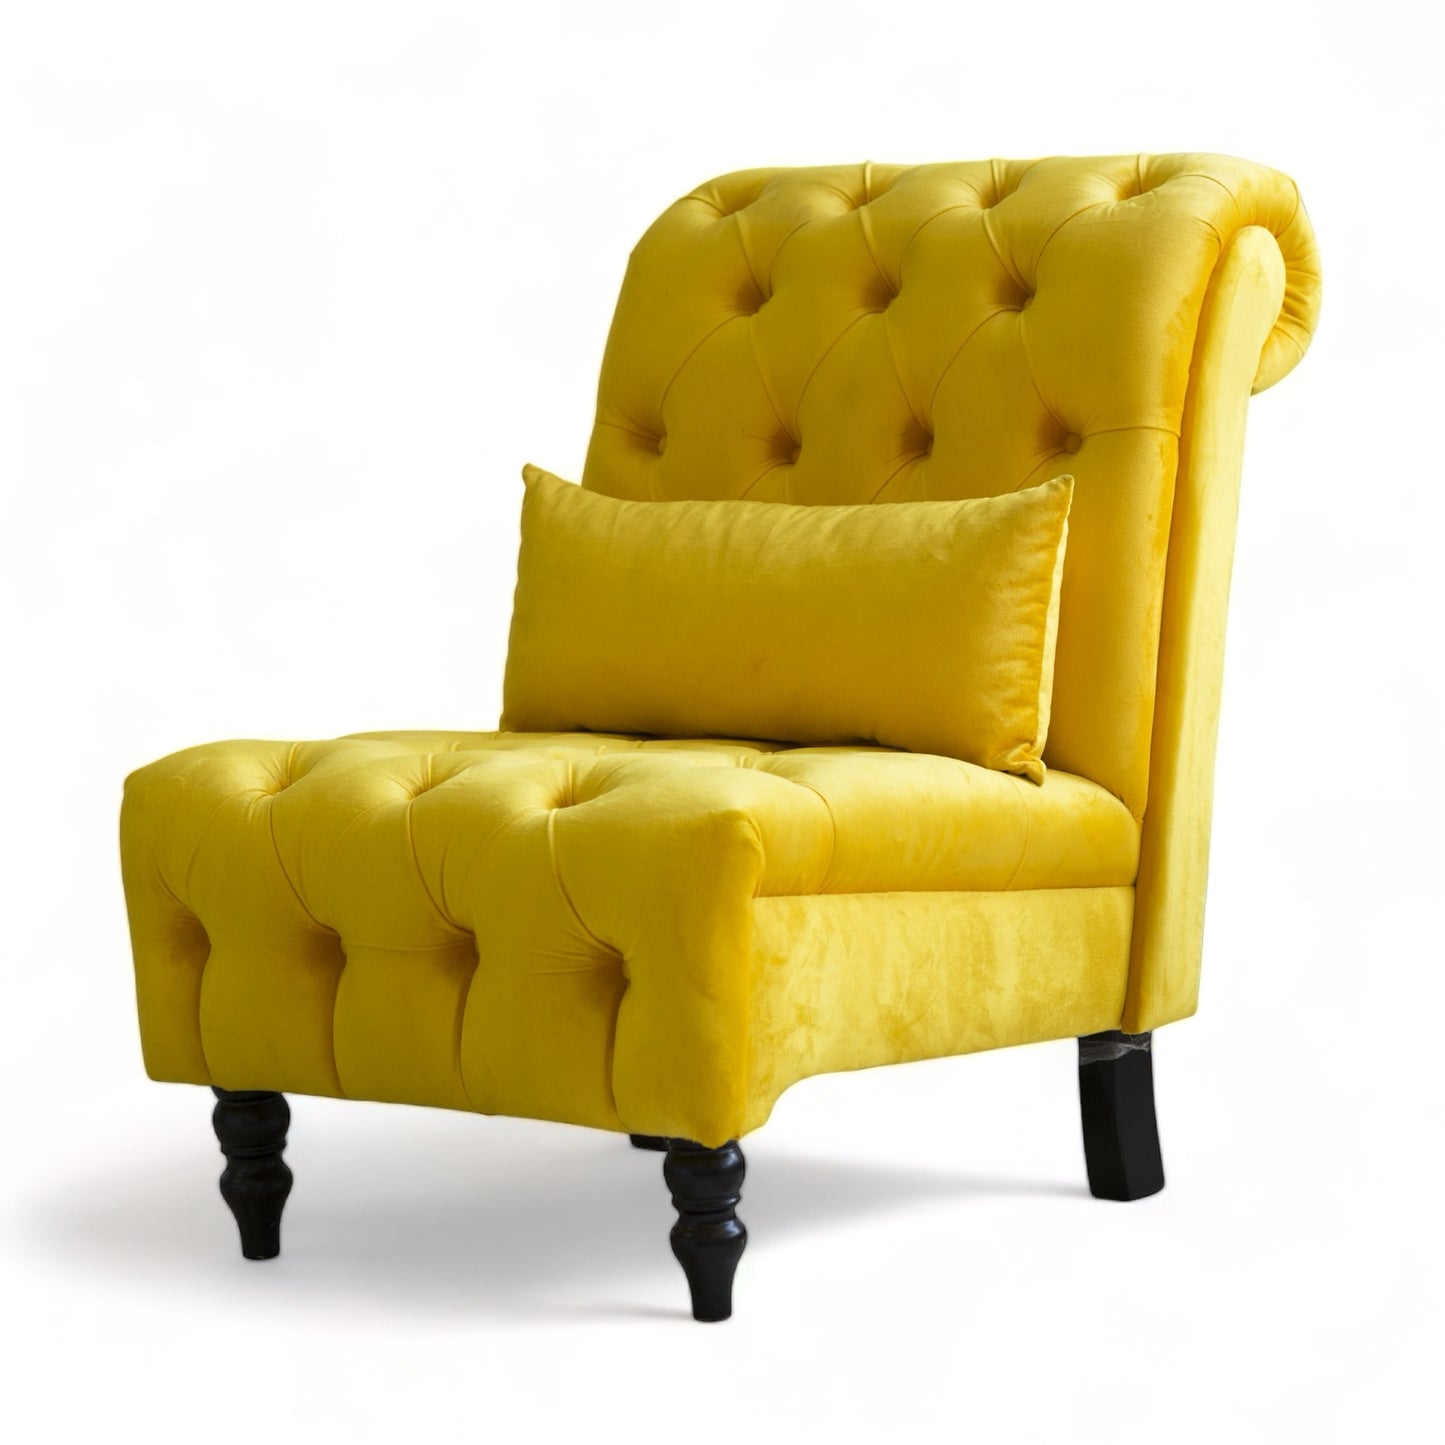 YELLOW OCCASIONAL CHAIR WITH WOODEN LEGS